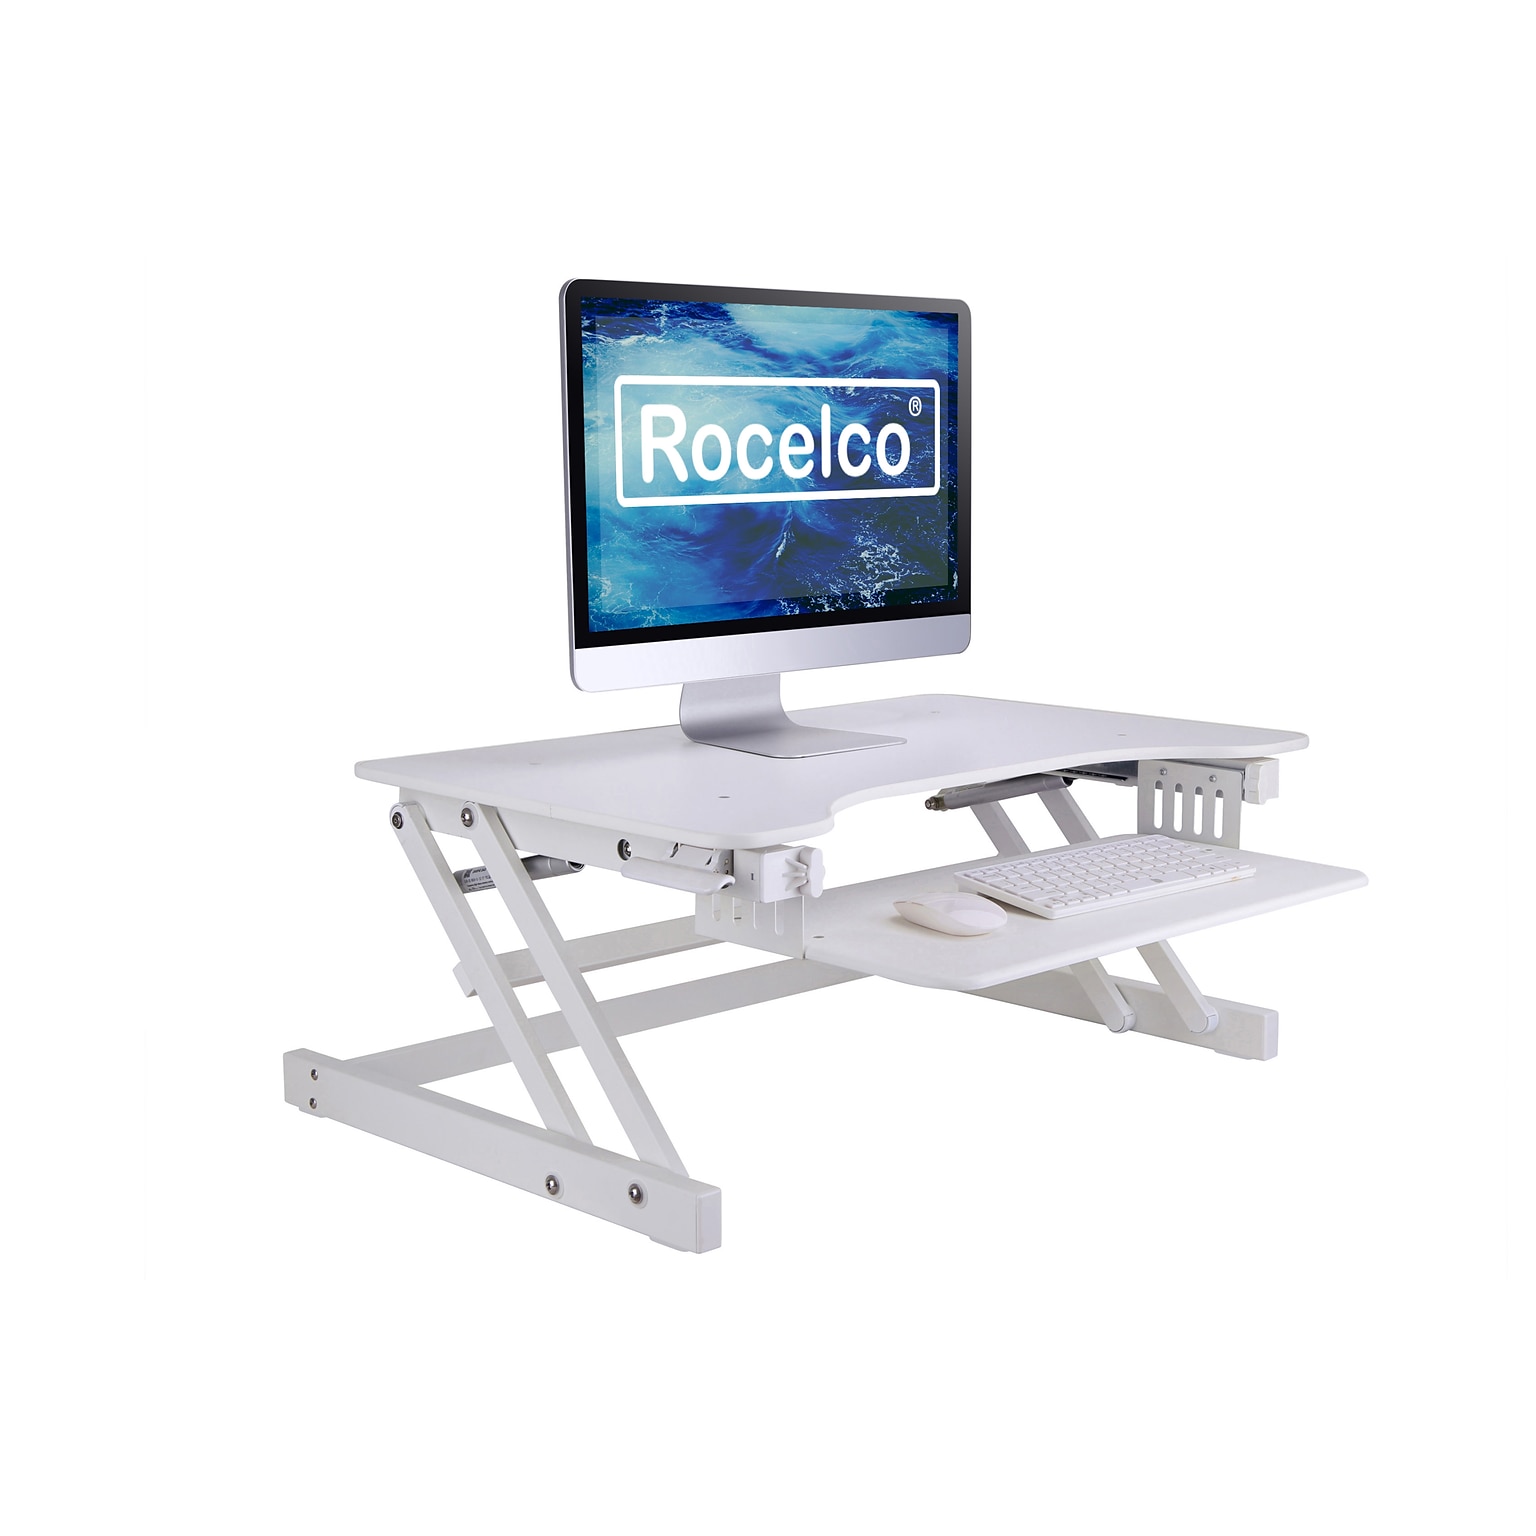 Rocelco 32 Height Adjustable Standing Desk Converter, Sit Stand Up Retractable Keyboard Riser, White (R ADRW)